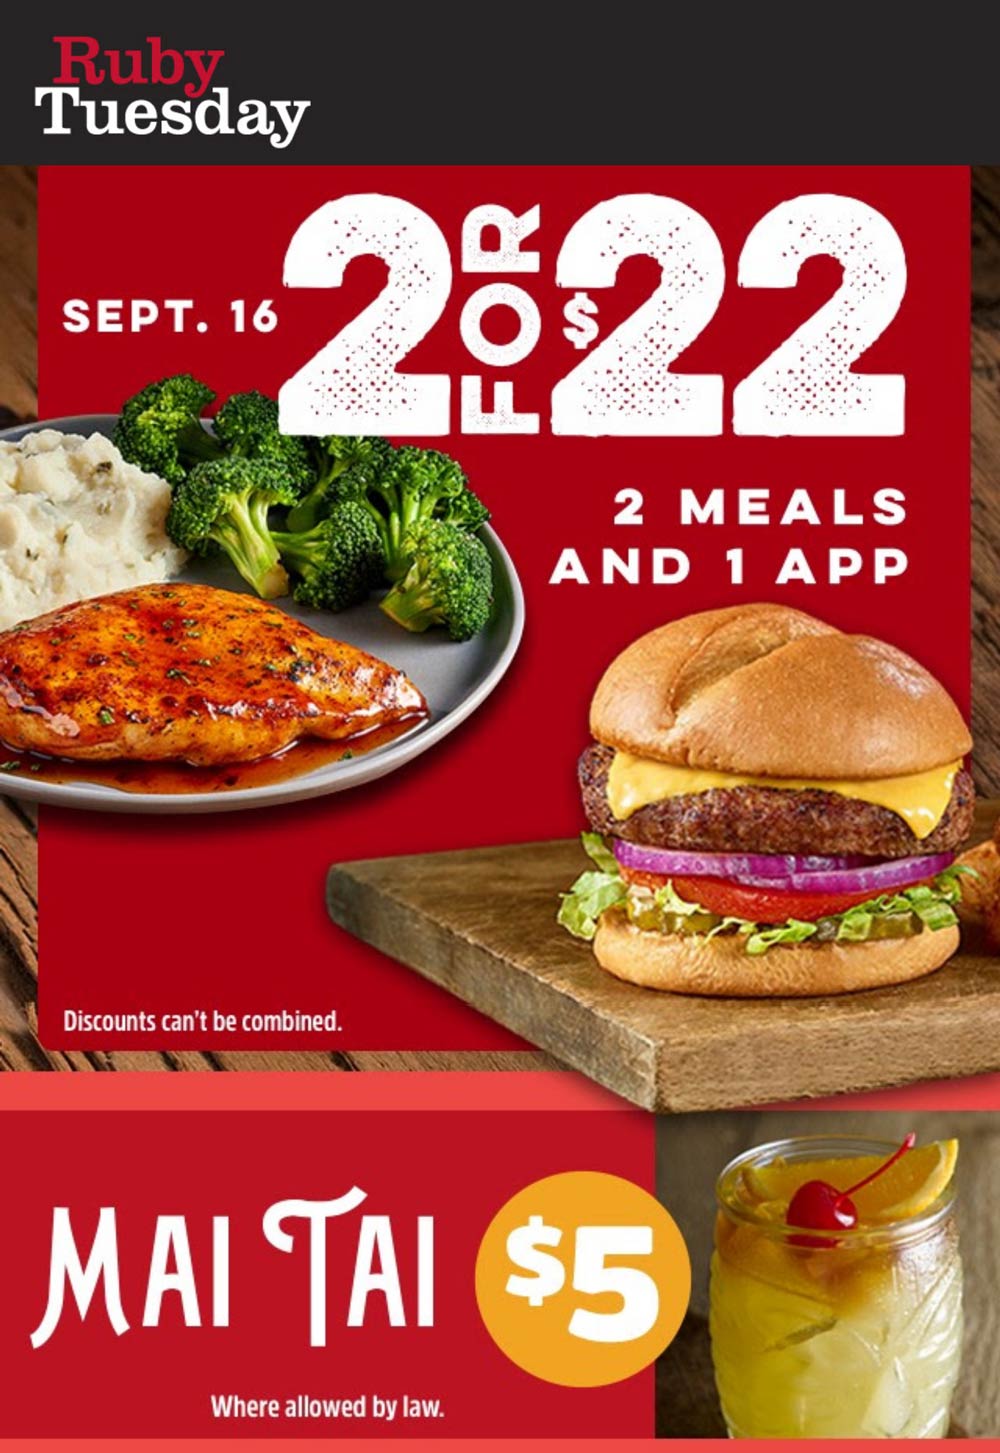 Ruby Tuesday restaurants Coupon  2 entrees + appetizer = $22 today at Ruby Tuesday #rubytuesday 